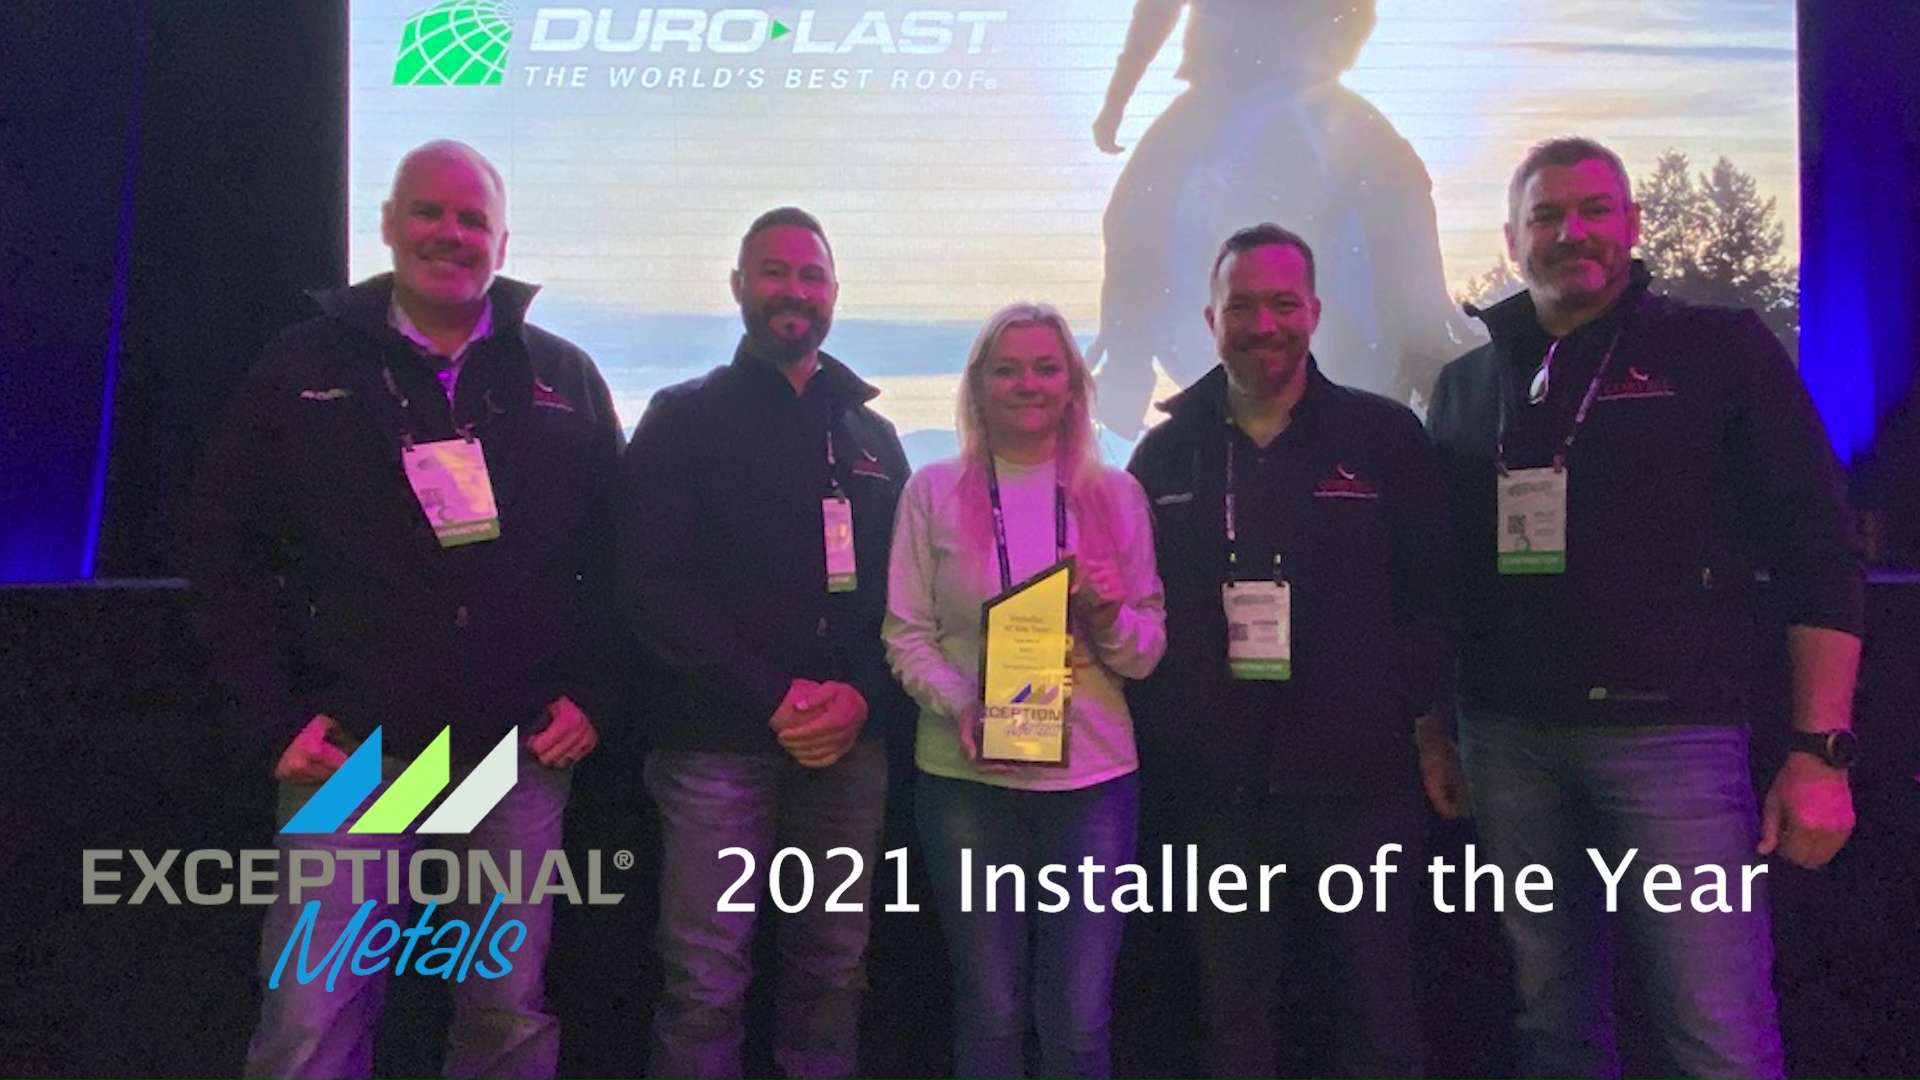 Team Coryell accepting their Exceptional Metals 2021 Installer of the Year Award.